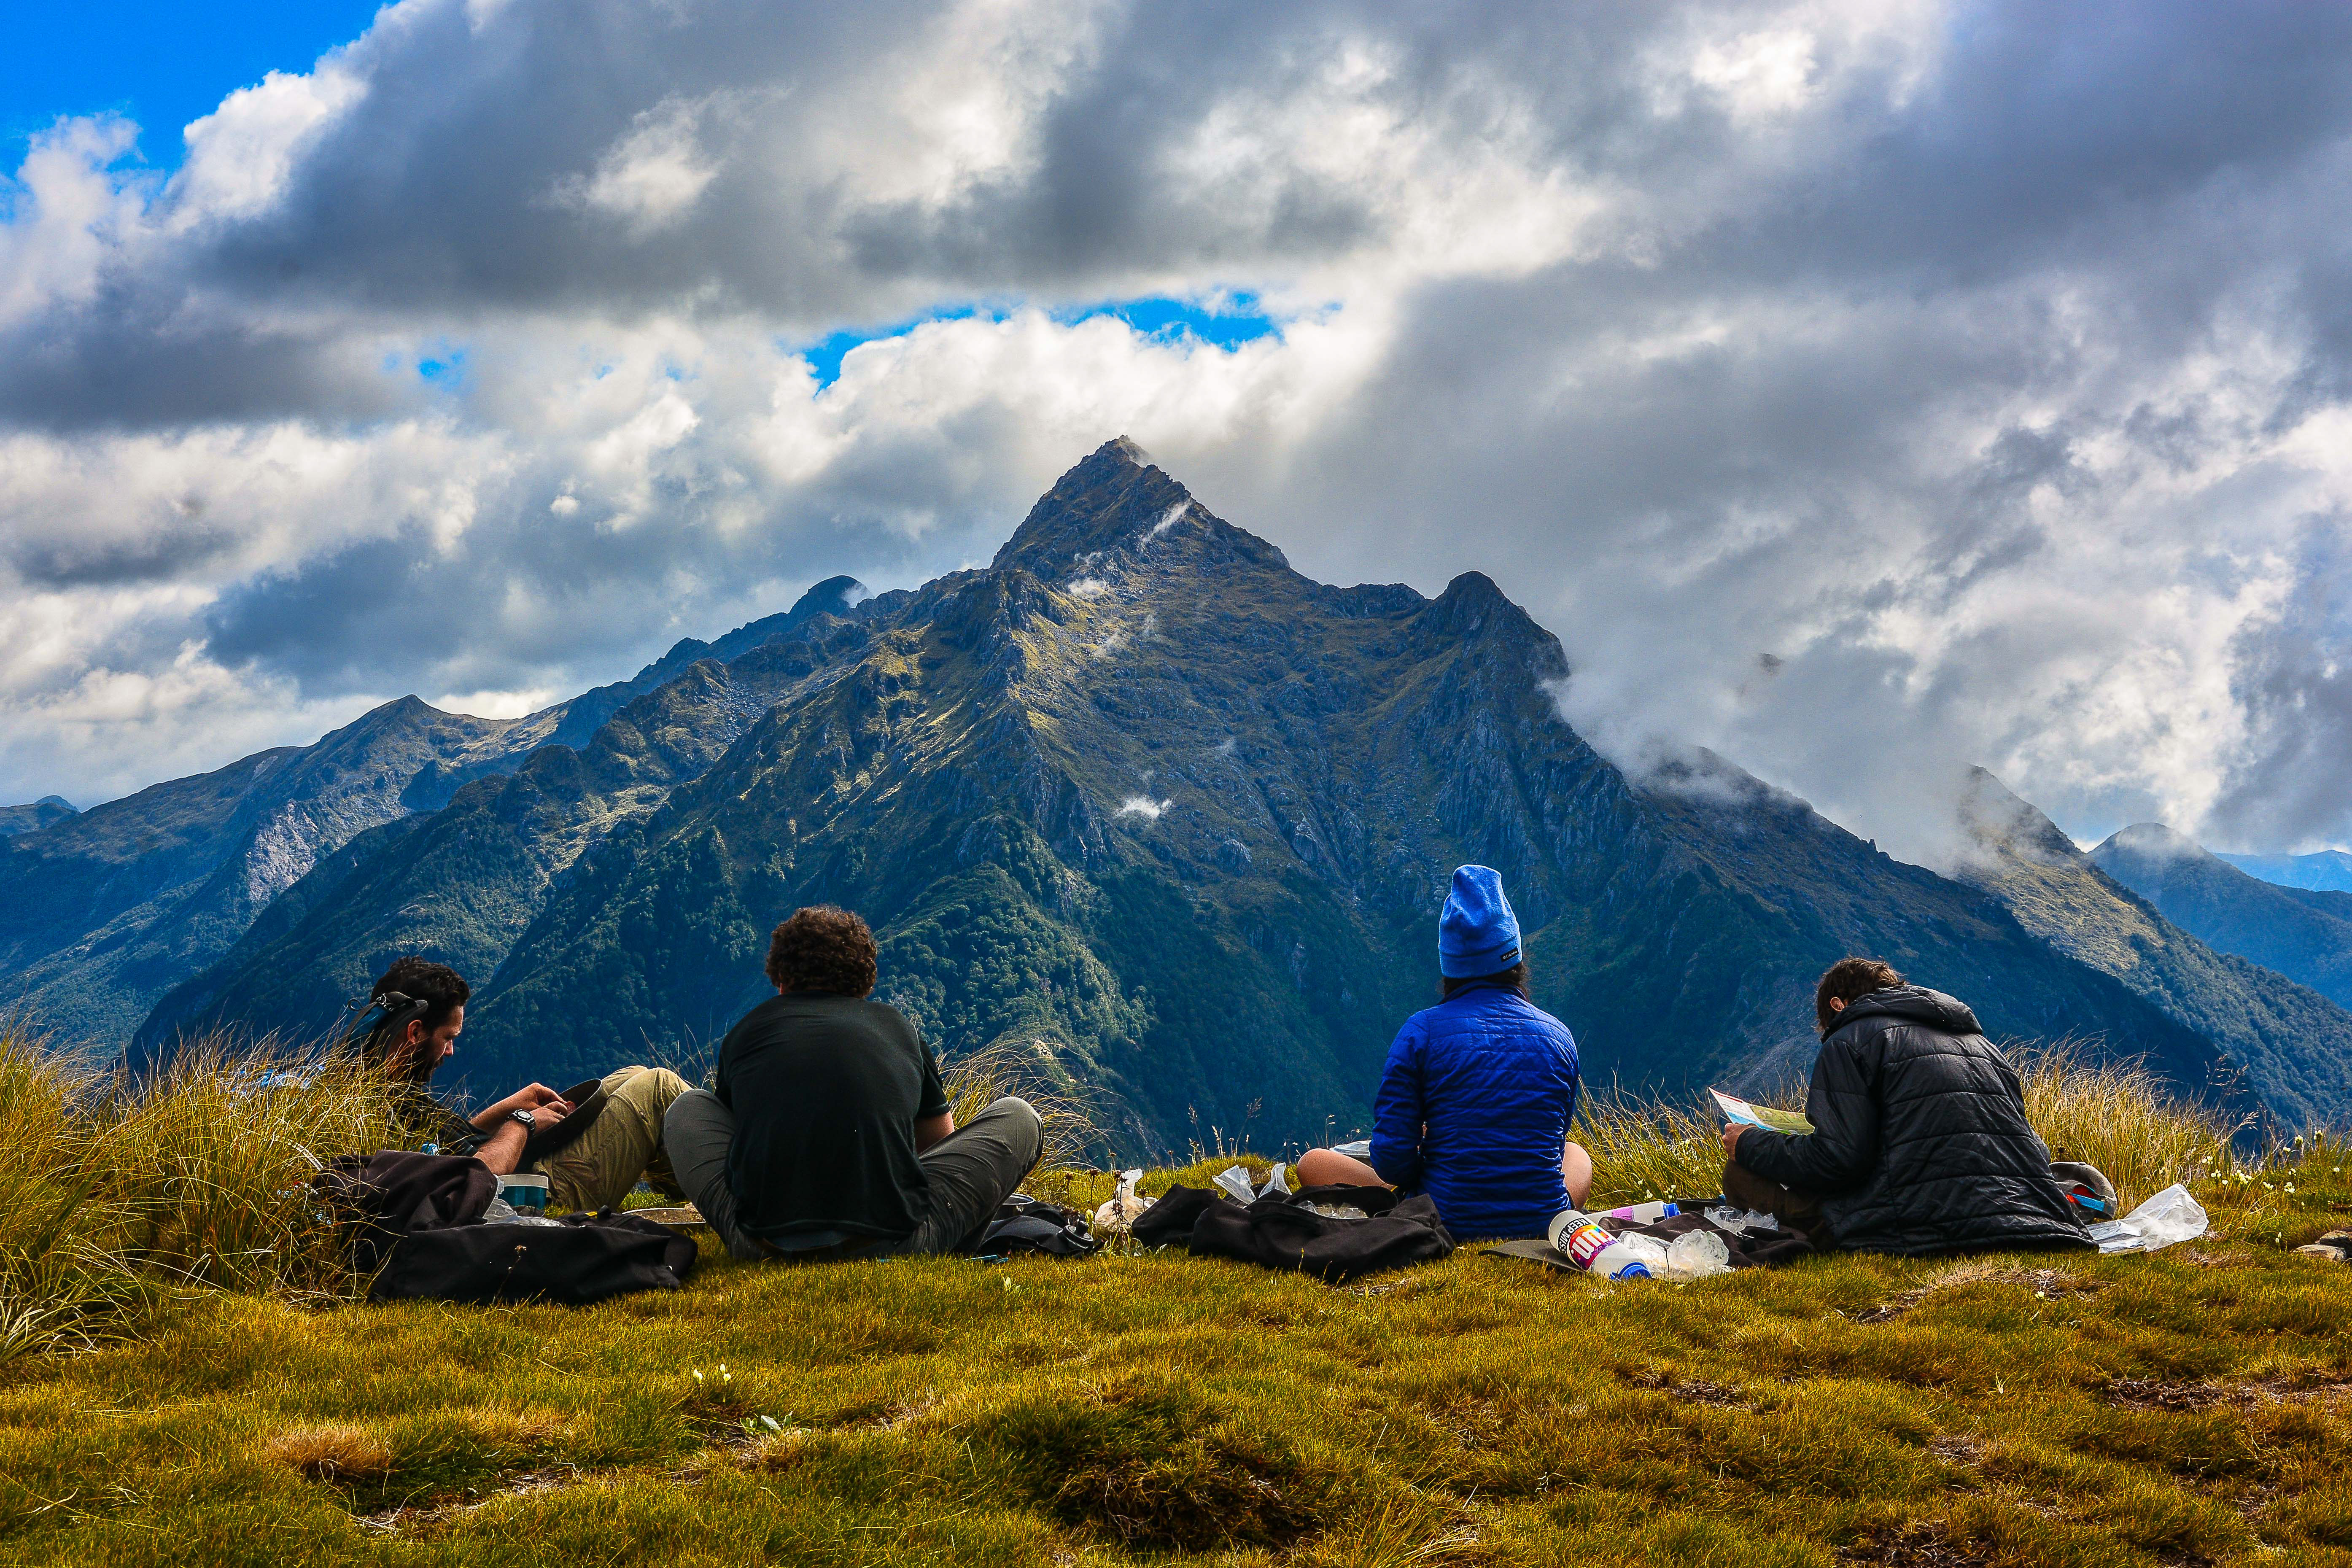 Four students preparing a meal while overlooking a New Zealand mountain range